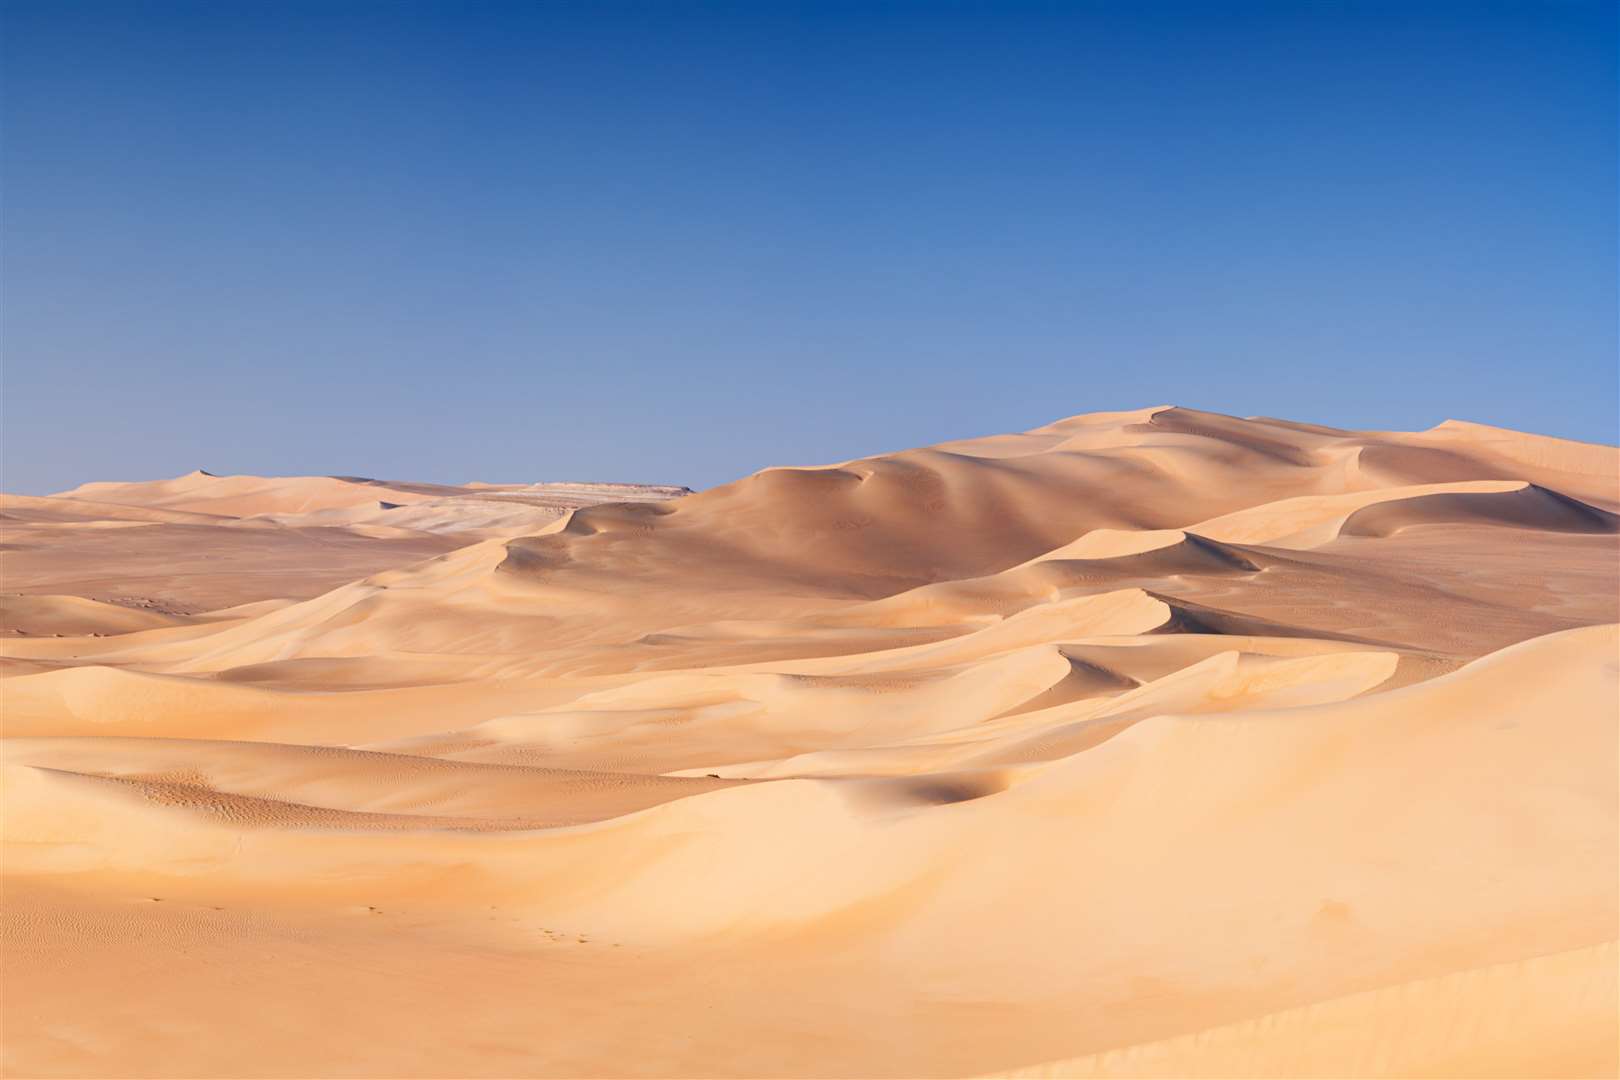 The sand is carried as a result of a sandstorm in the Sahara Desert